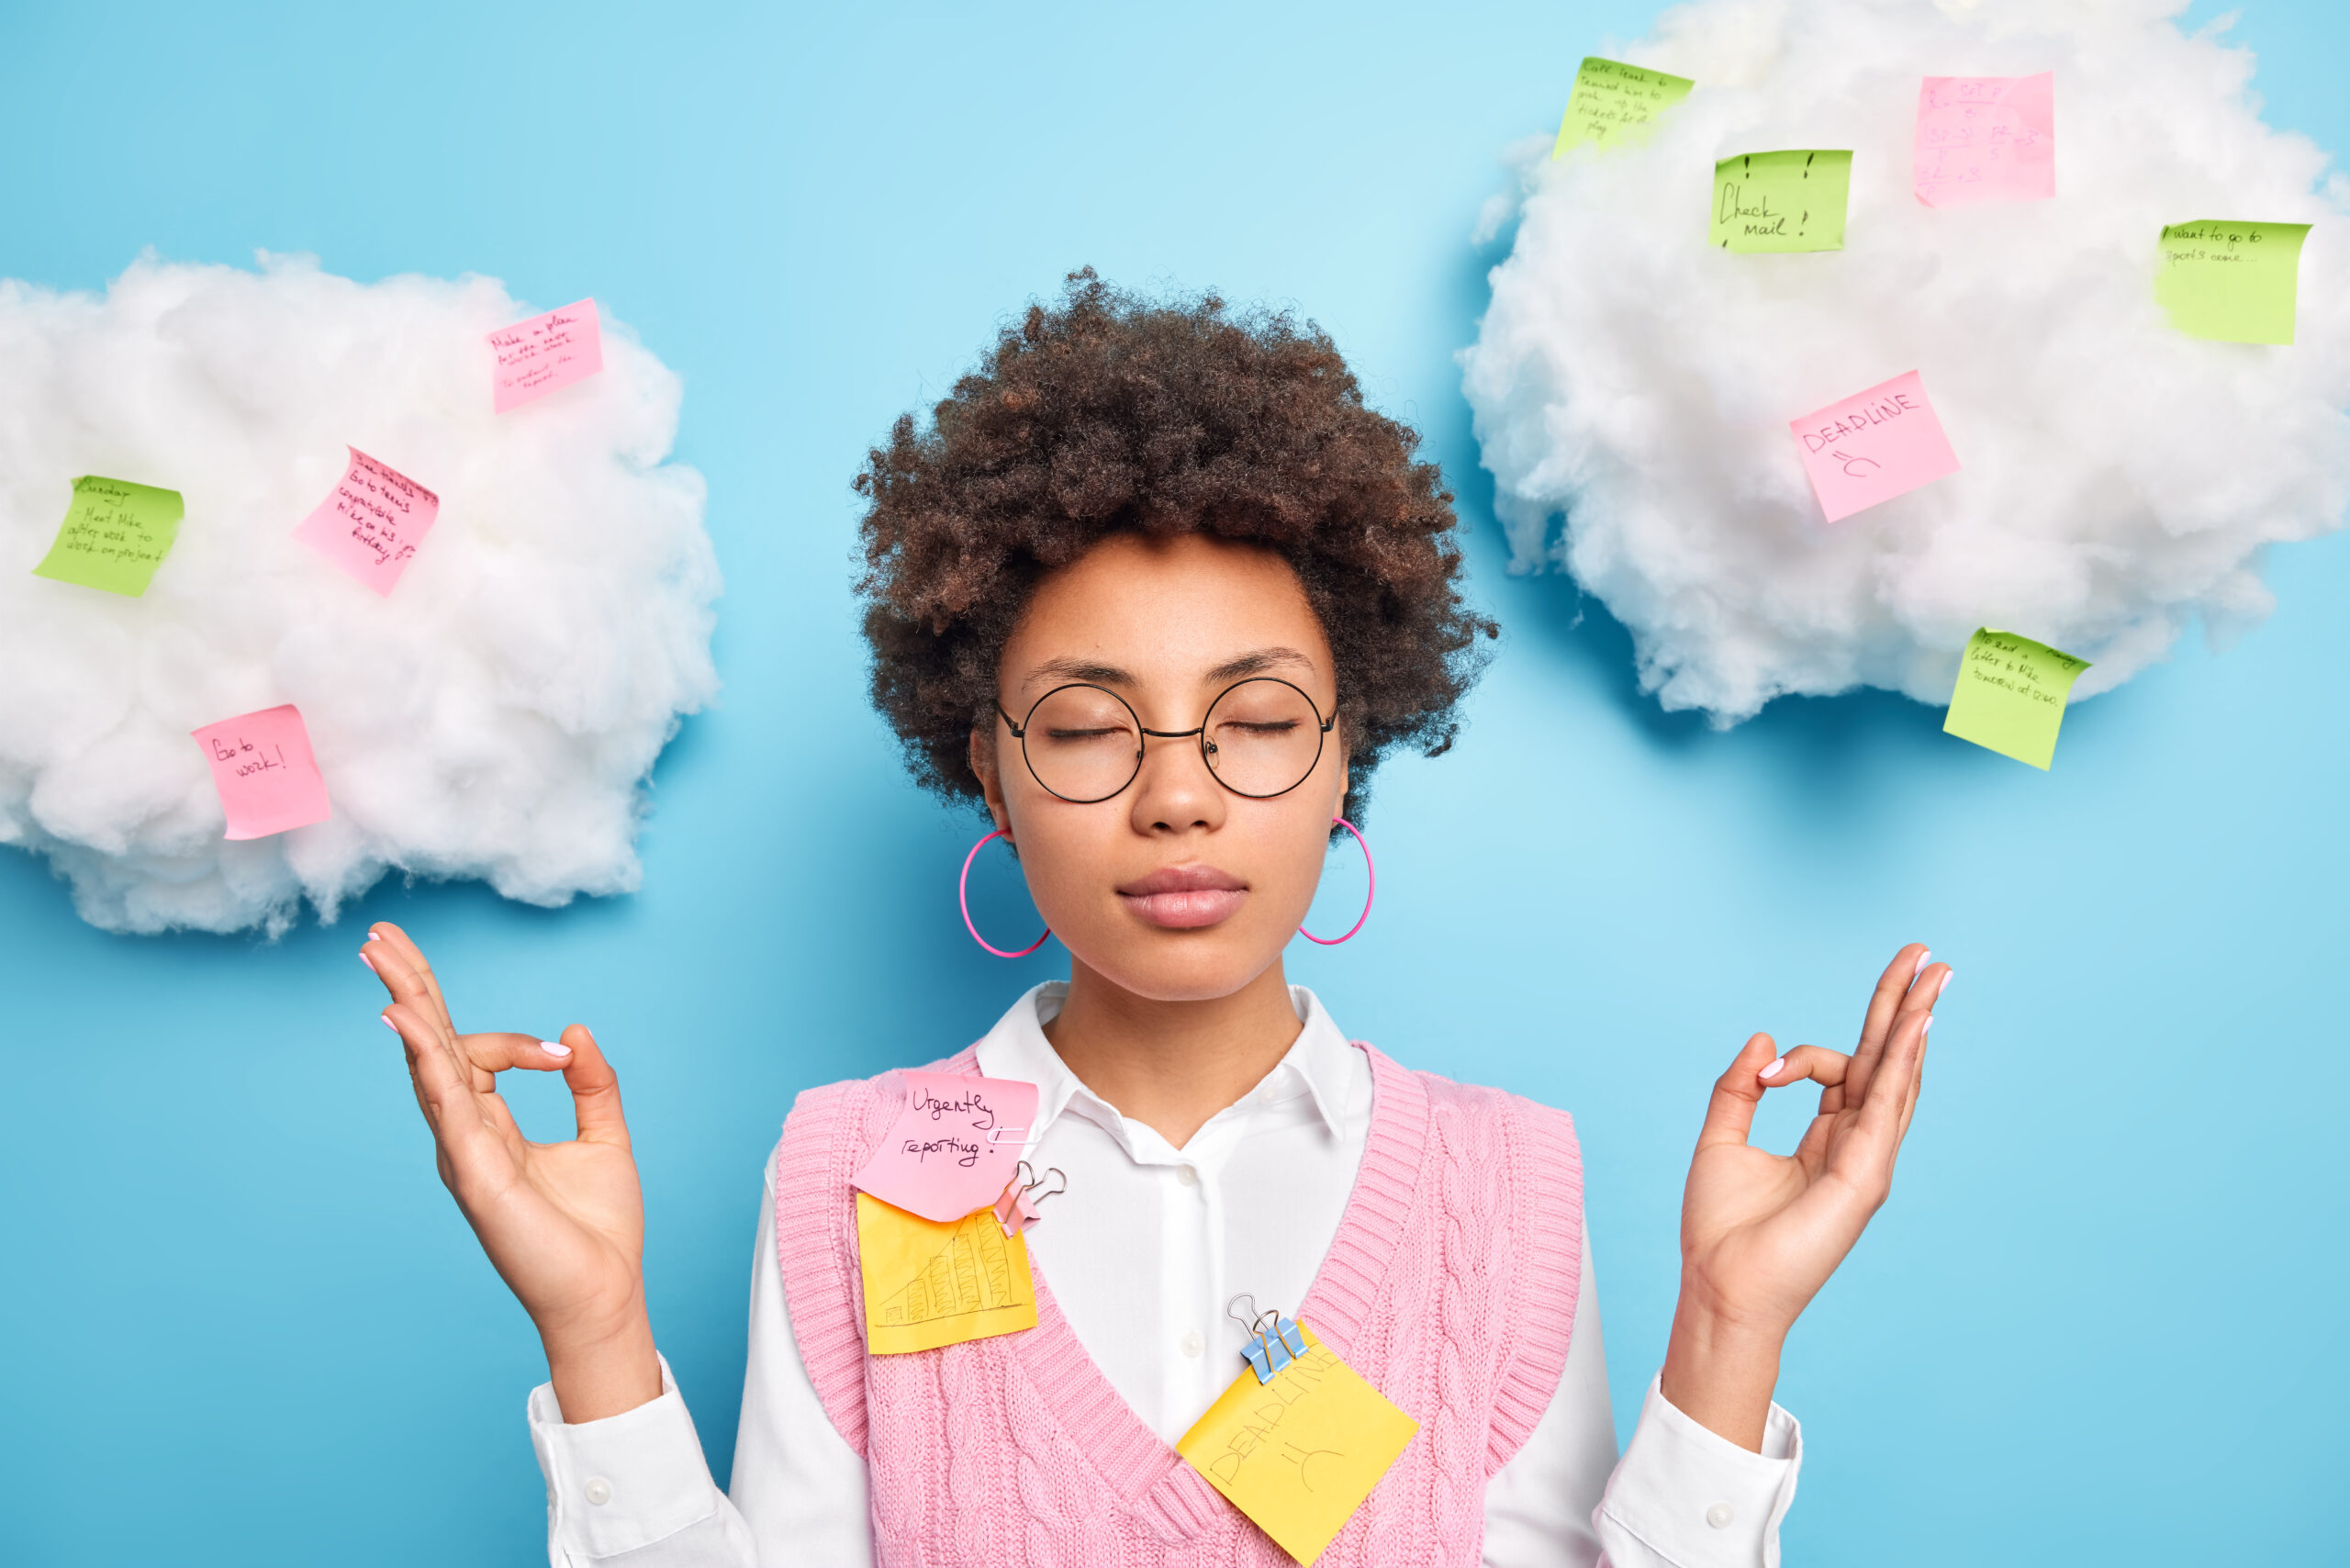 Brown skinned woman meditates with her eyes closed and her hands in a mudra position, in front of a blue background with two thought clouds that each have post-it notes with words and symbols on them.